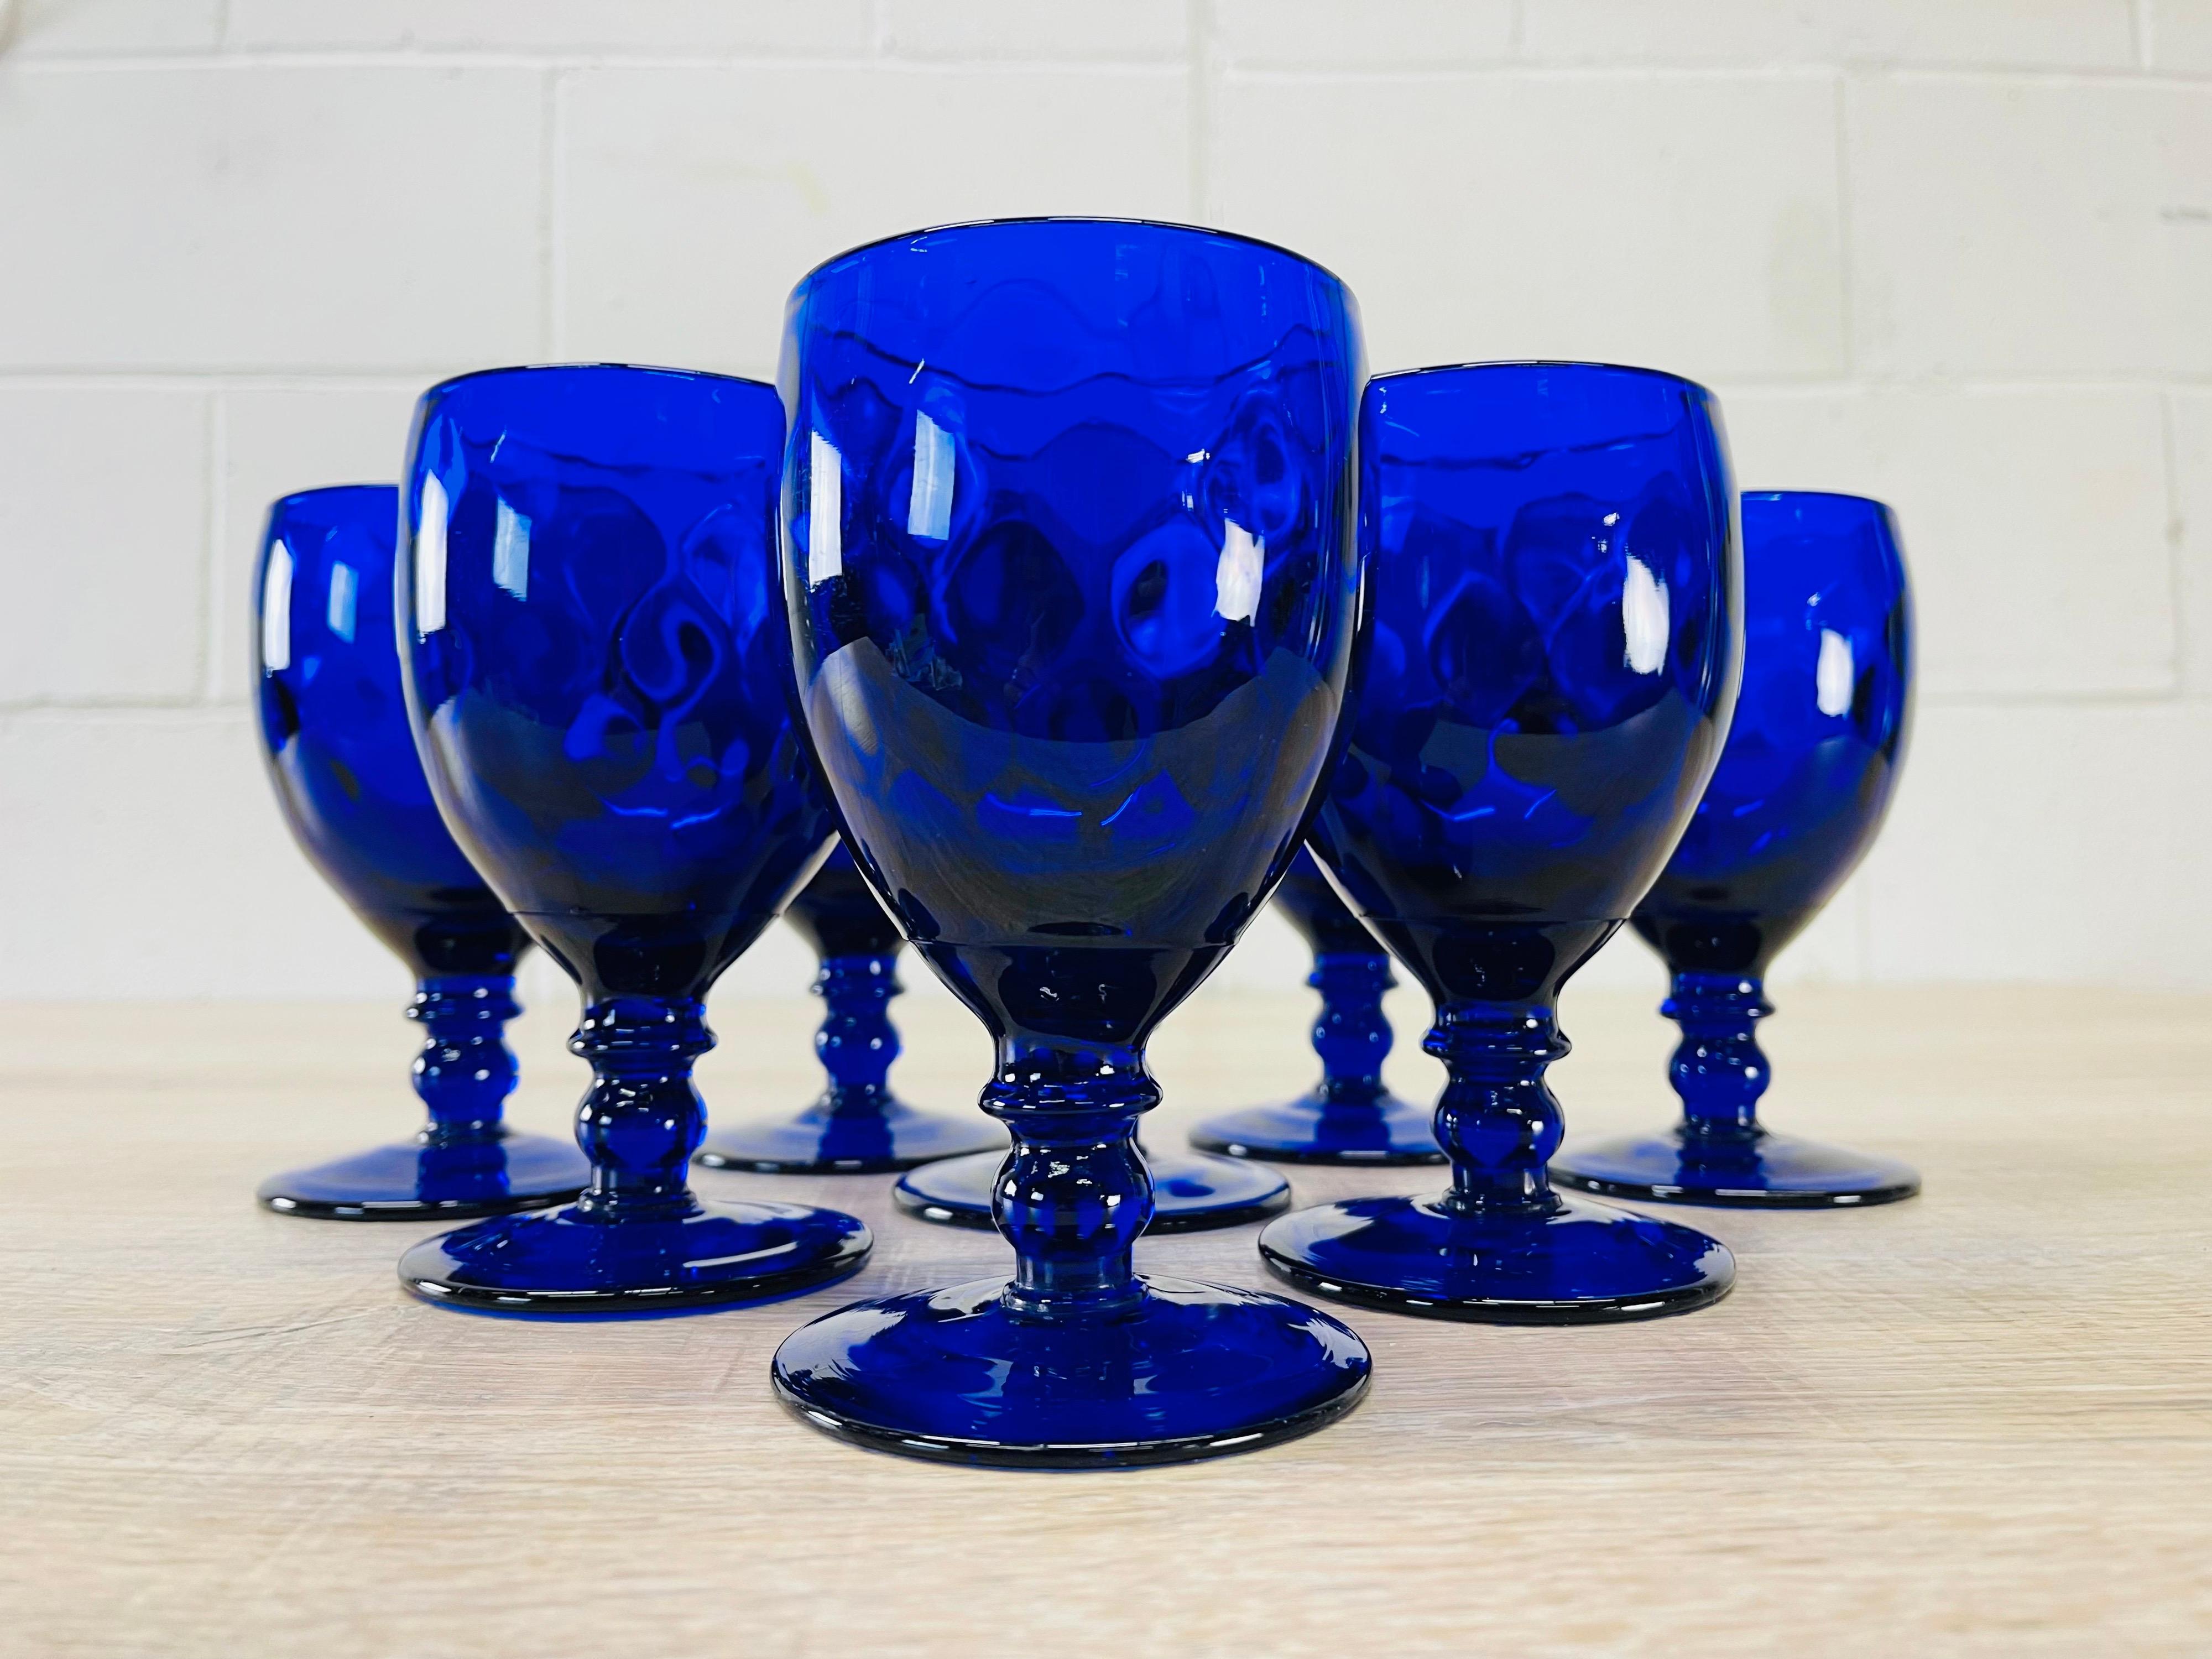 Vintage 1950s set of 8 quilted cobalt glass water stems. Quilted design with a ball stem. No marks.